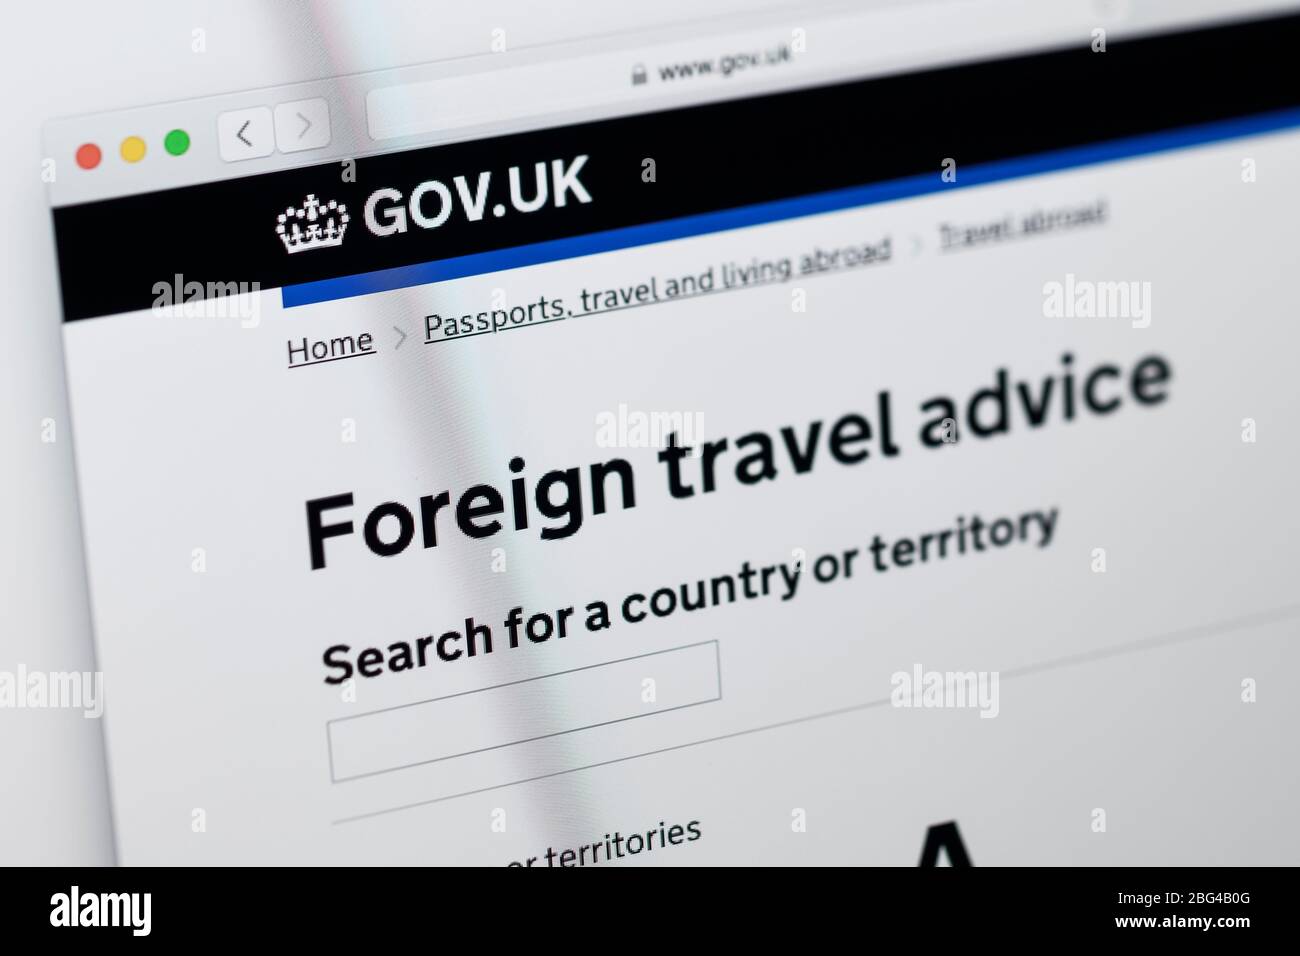 Close up detail of the home page of the UK government website showing information for foreign travel advice Stock Photo